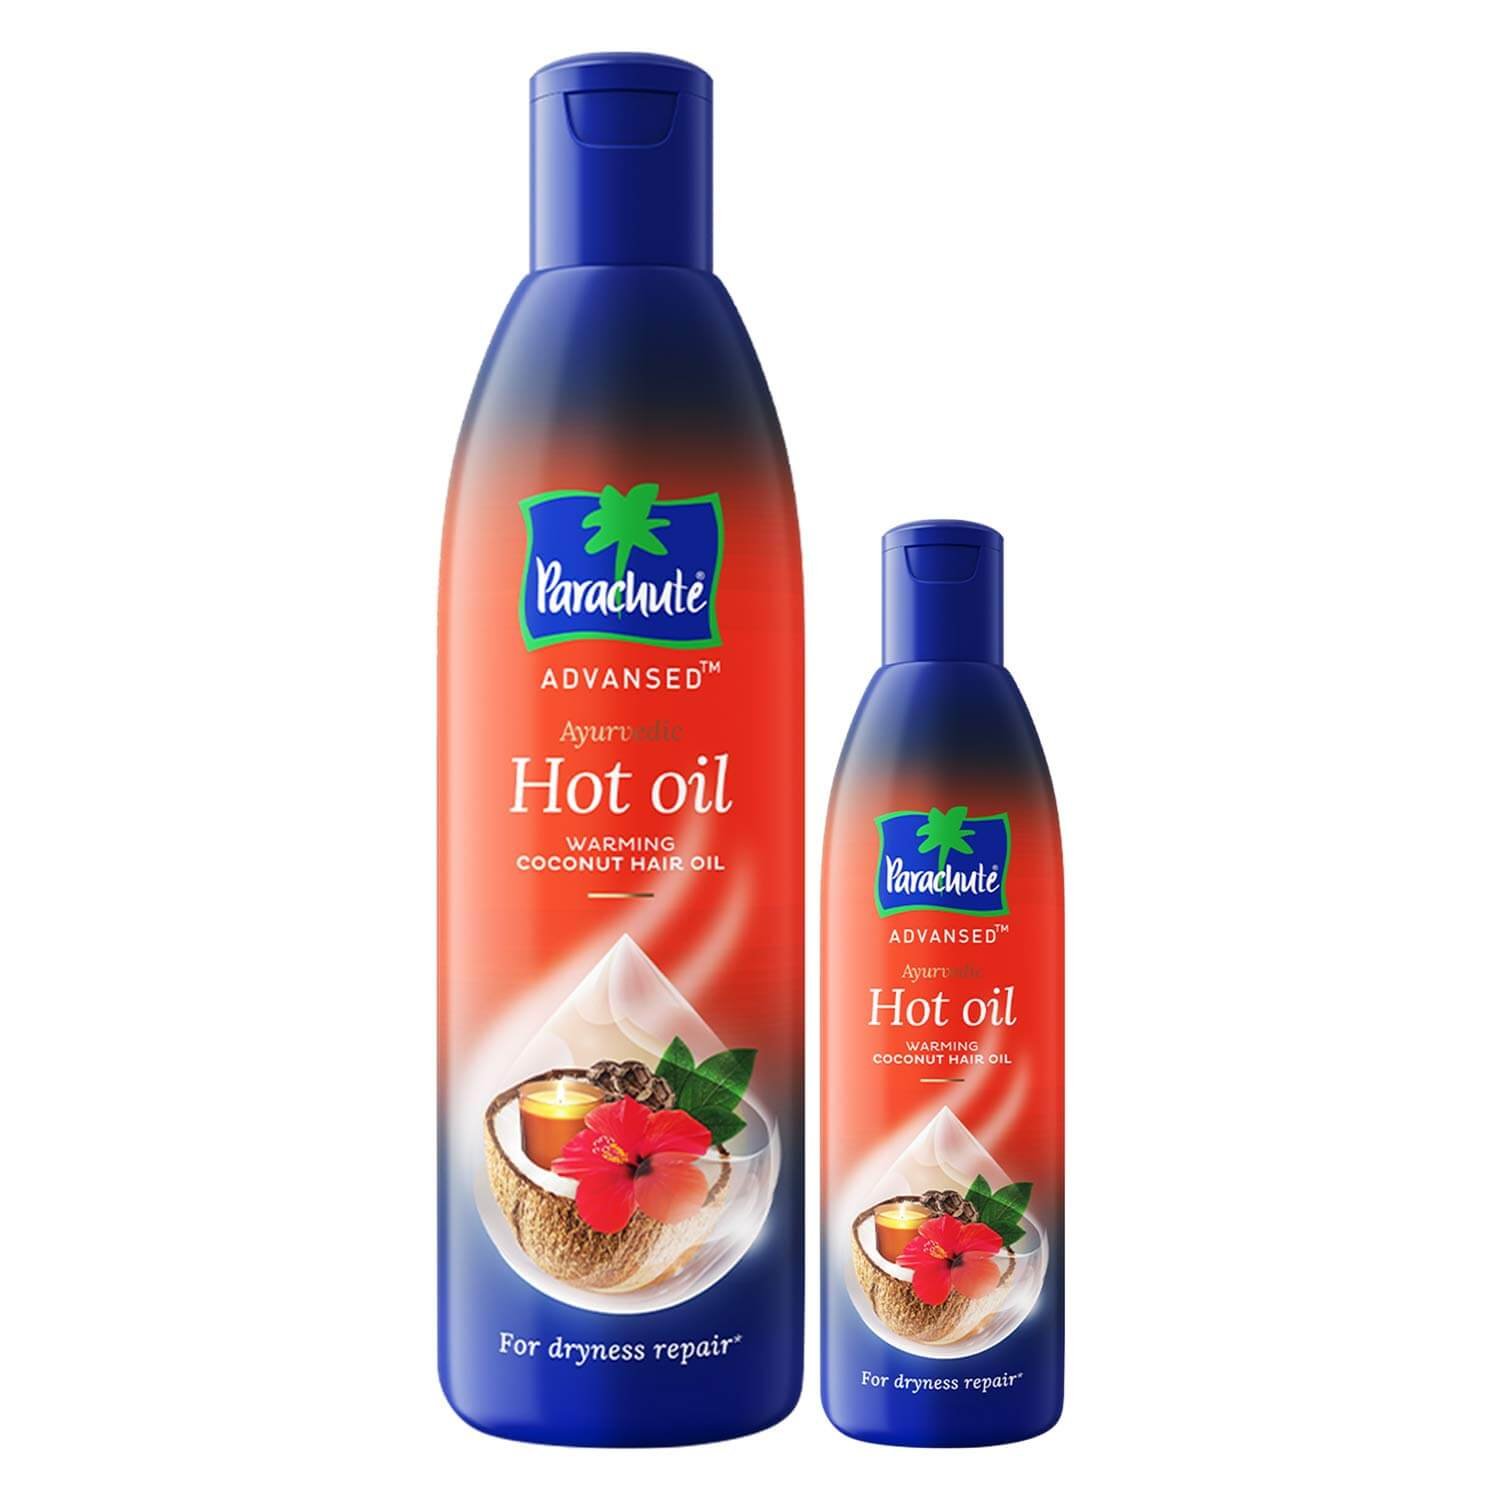 Parachute Advansed Ayurvedic Hot Oil,Warming Coconut Hair Oil,Frizz Free Hair, 400 ml With Free 90 ml